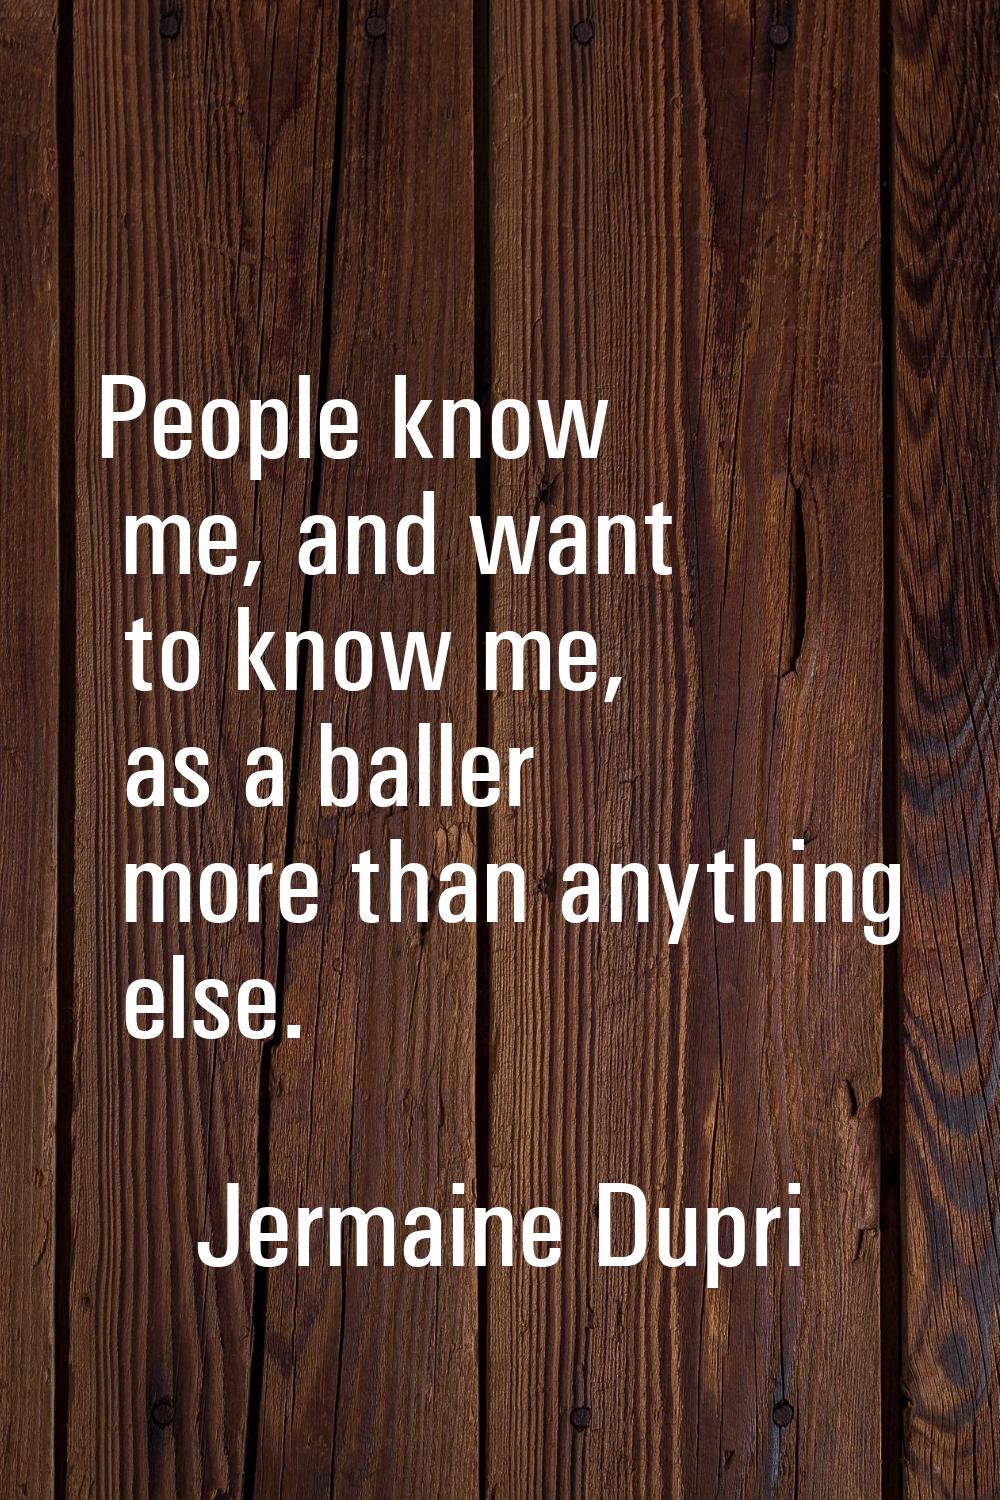 People know me, and want to know me, as a baller more than anything else.